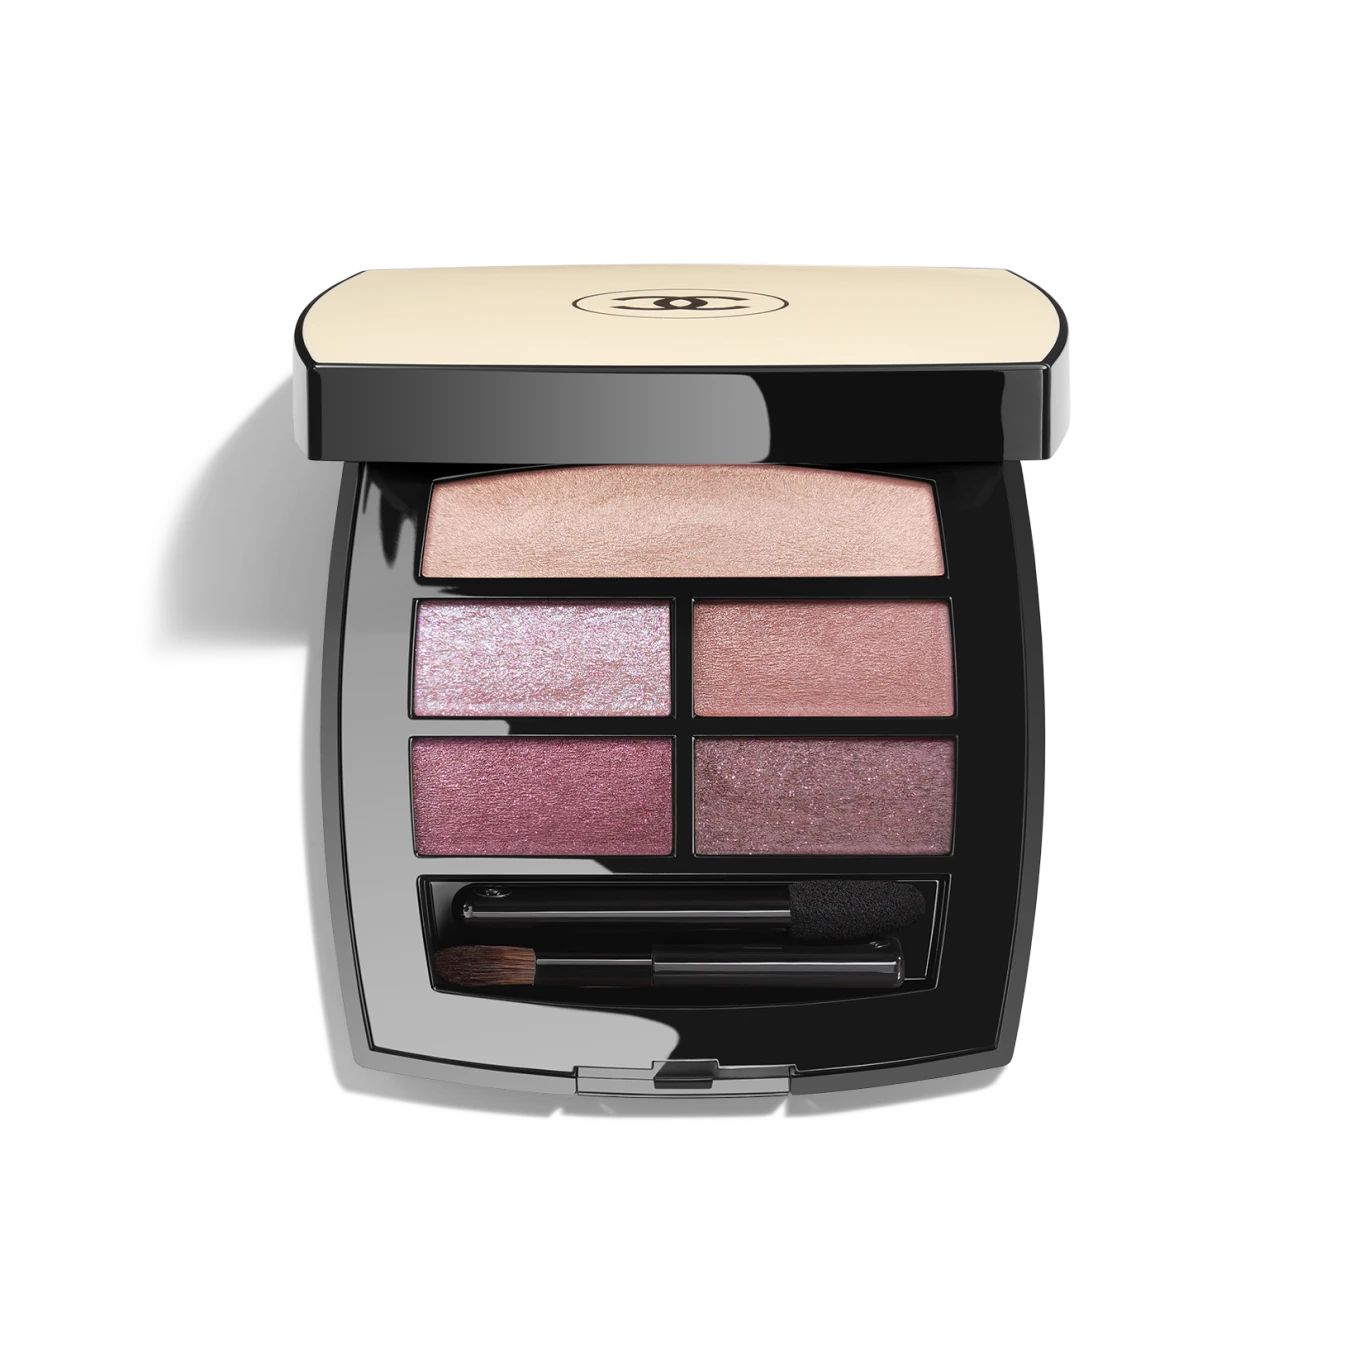 LES BEIGES Healthy glow natural eyeshadow palette Cool | CHANEL | Chanel, Inc. (US)